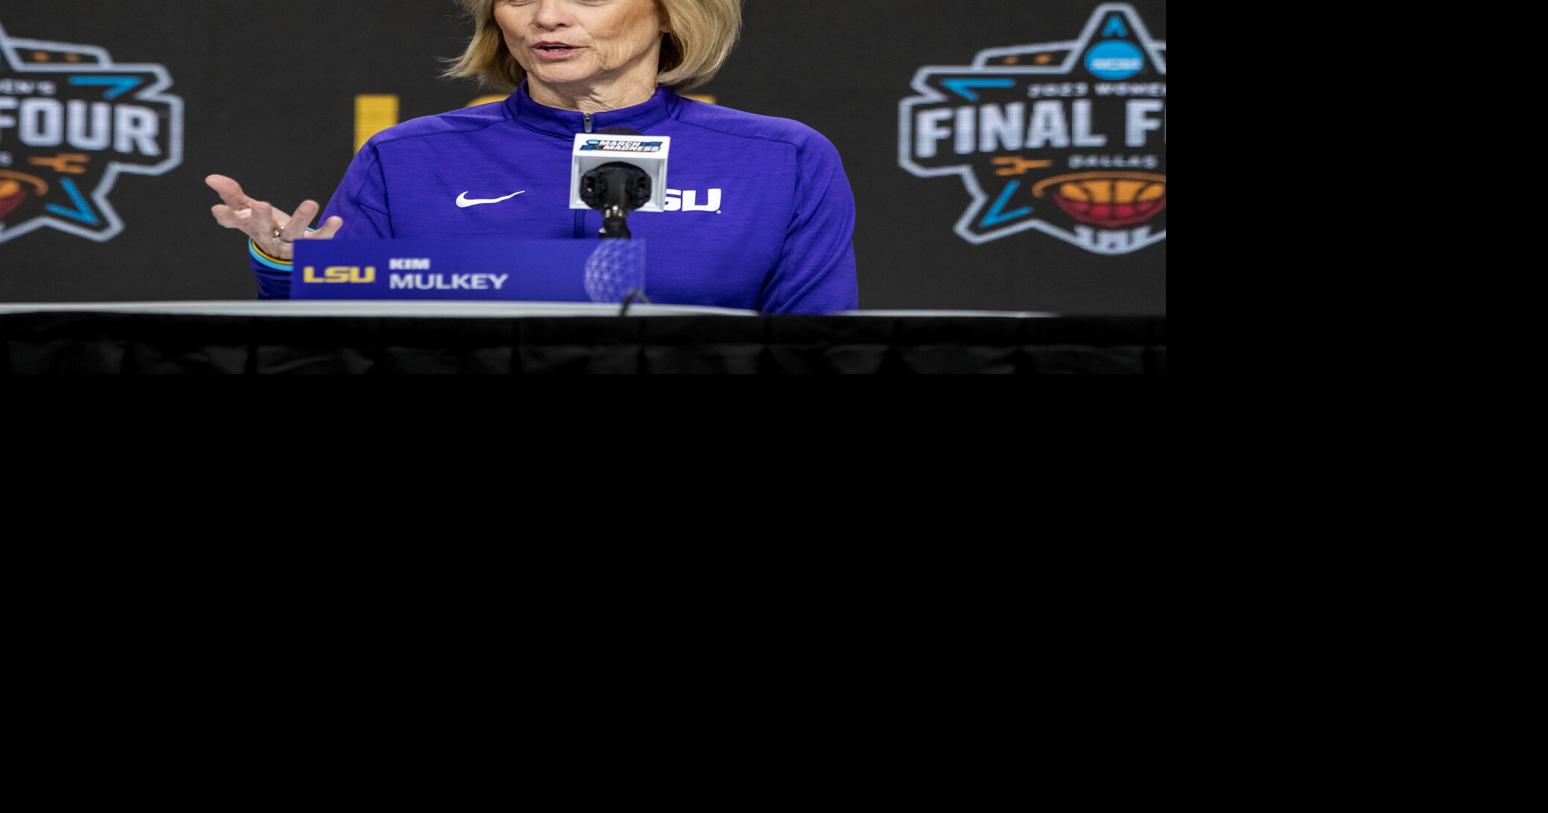 Kim Mulkey, a Colorful and Divisive Coach, Wins Another Title